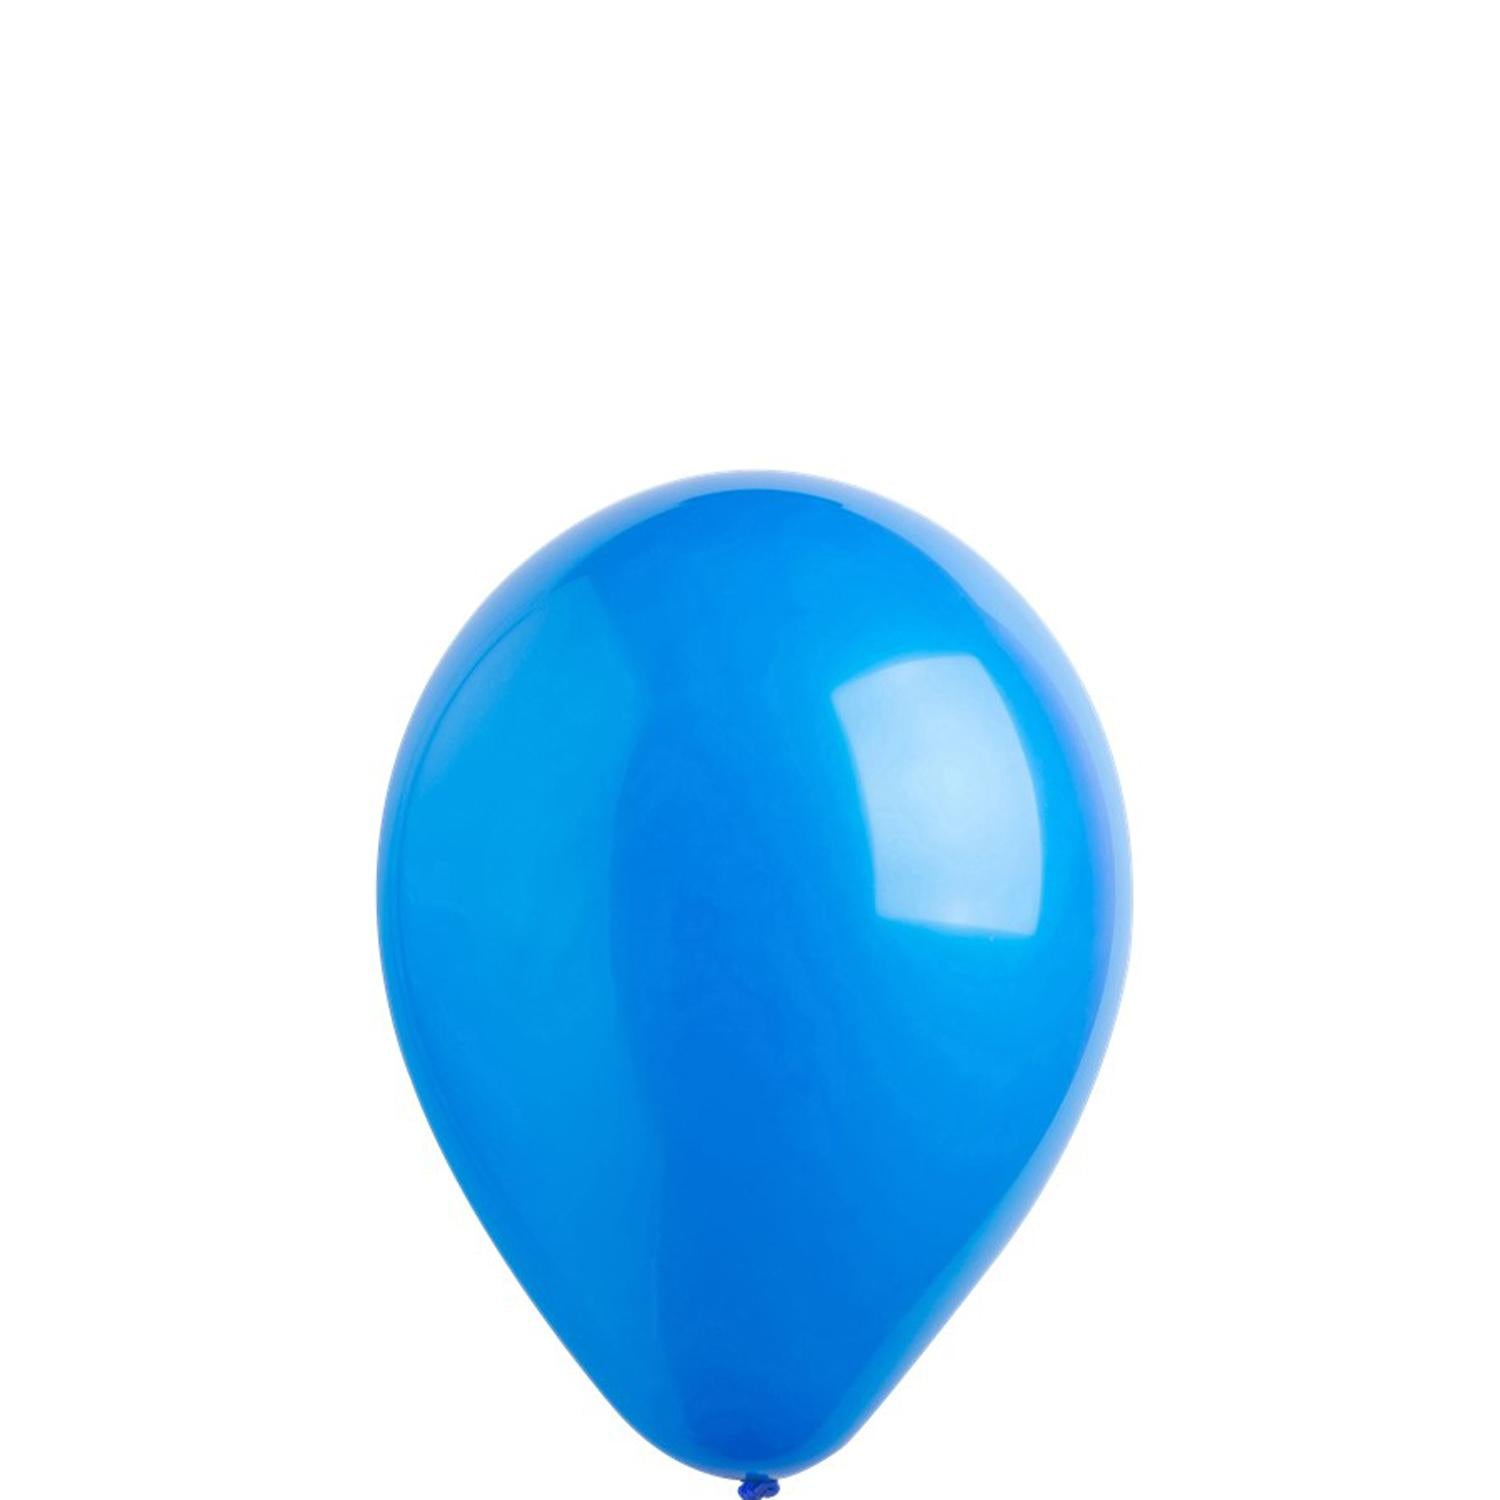 Bright Royal Blue Standard Latex Balloons 5in, 100pcs Balloons & Streamers - Party Centre